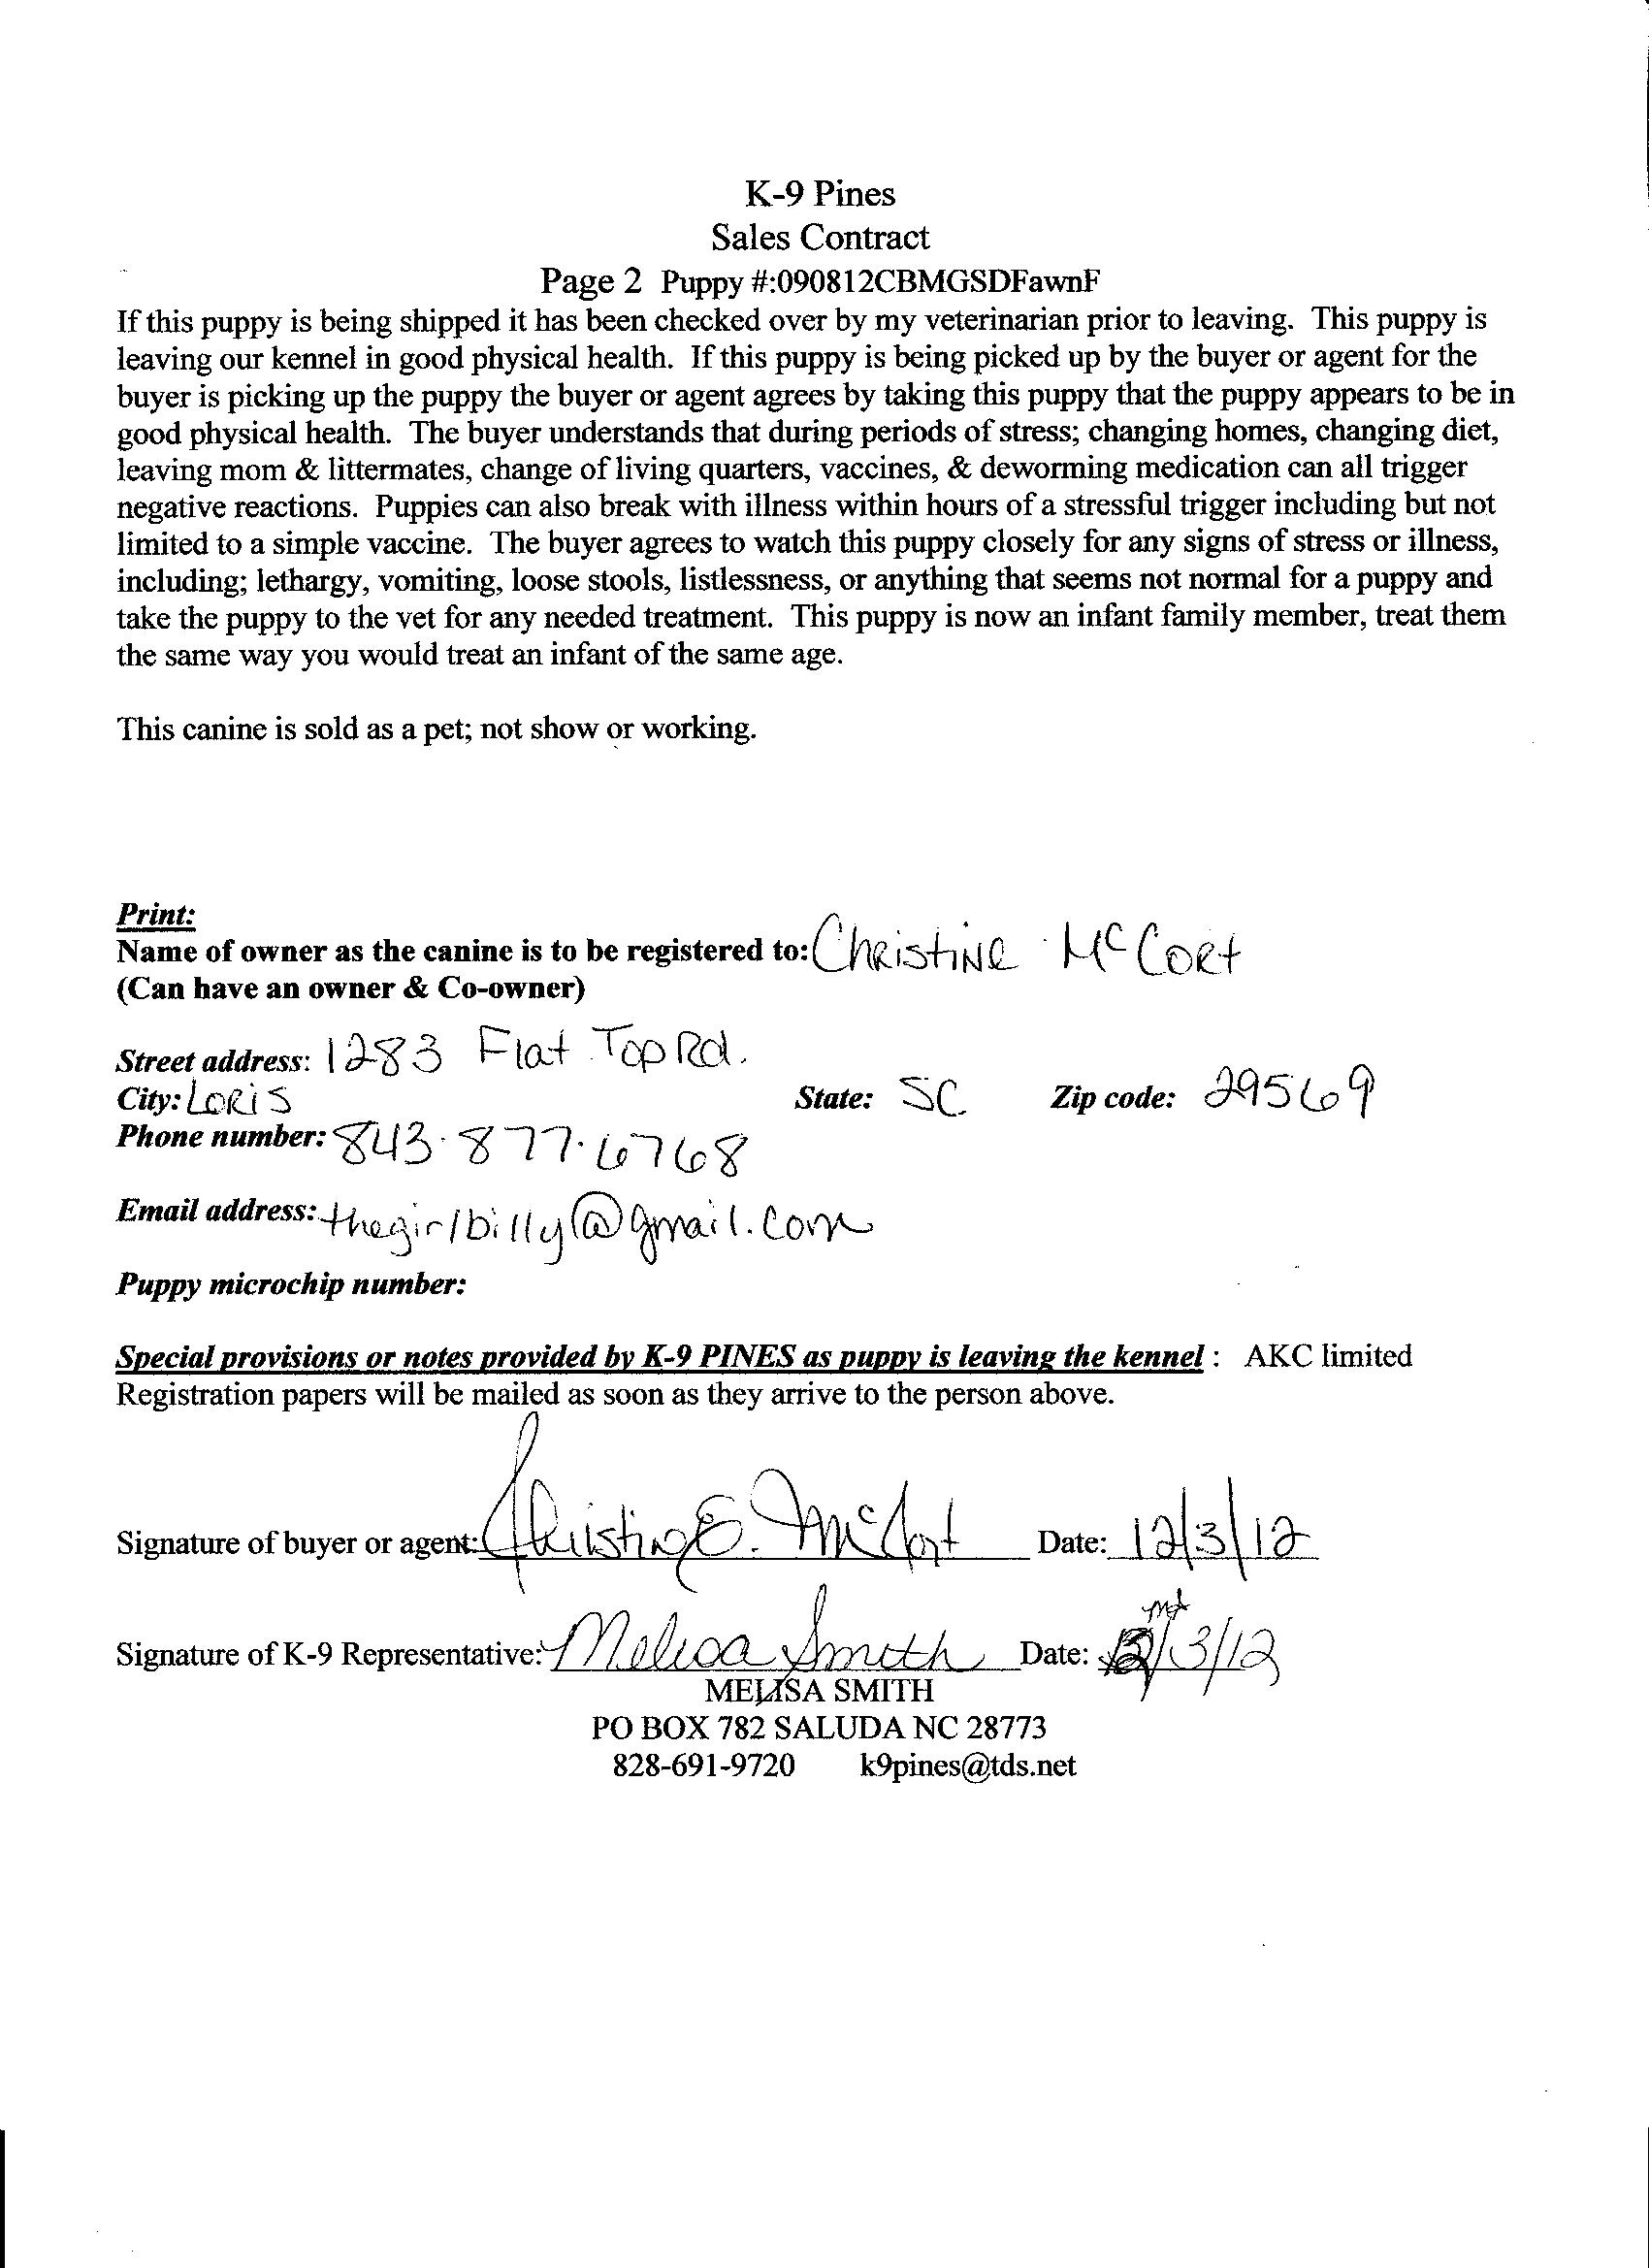 2nd page of sales contract showing Christine agreed to terms in which says papers will be mailed as soon as they arrive.  